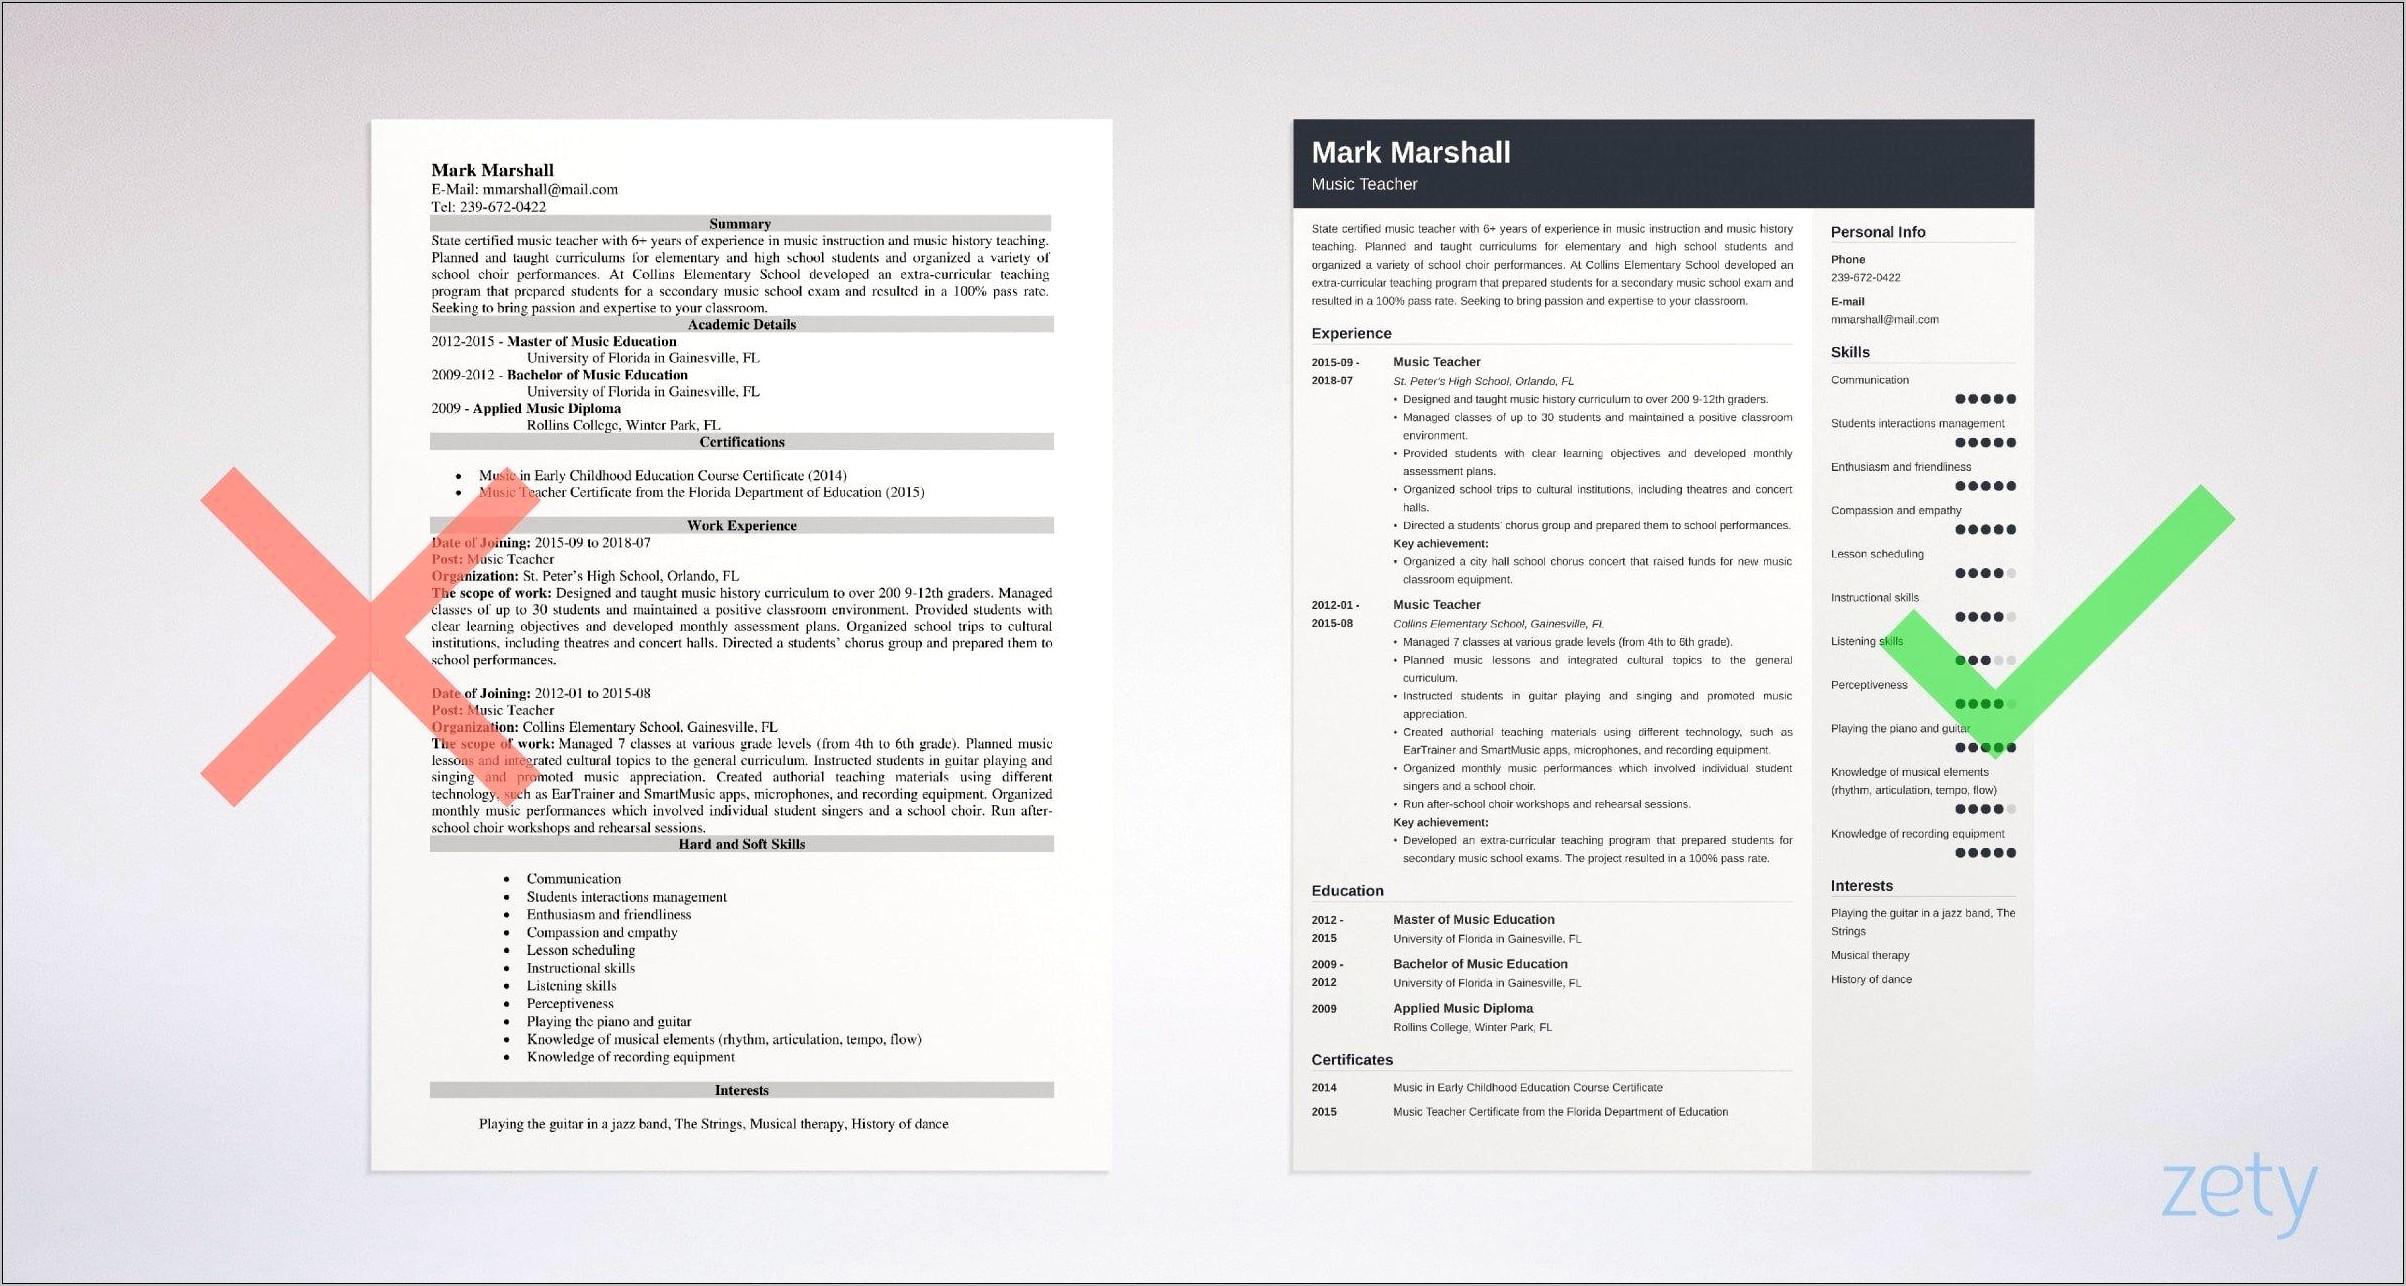 Examples Of Achievements On Resume For Musicians